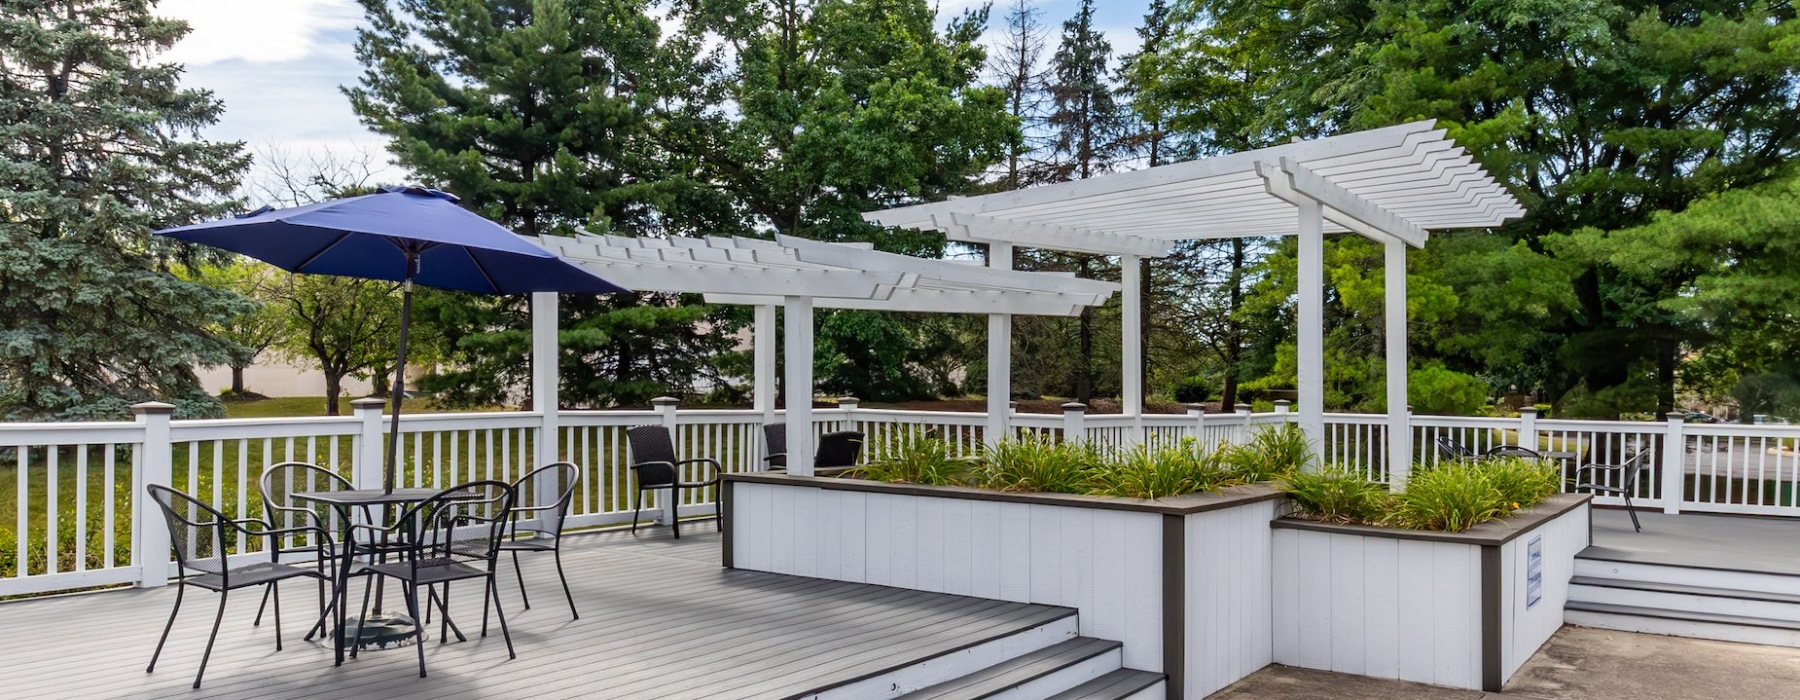 Outdoor dining area with pergola